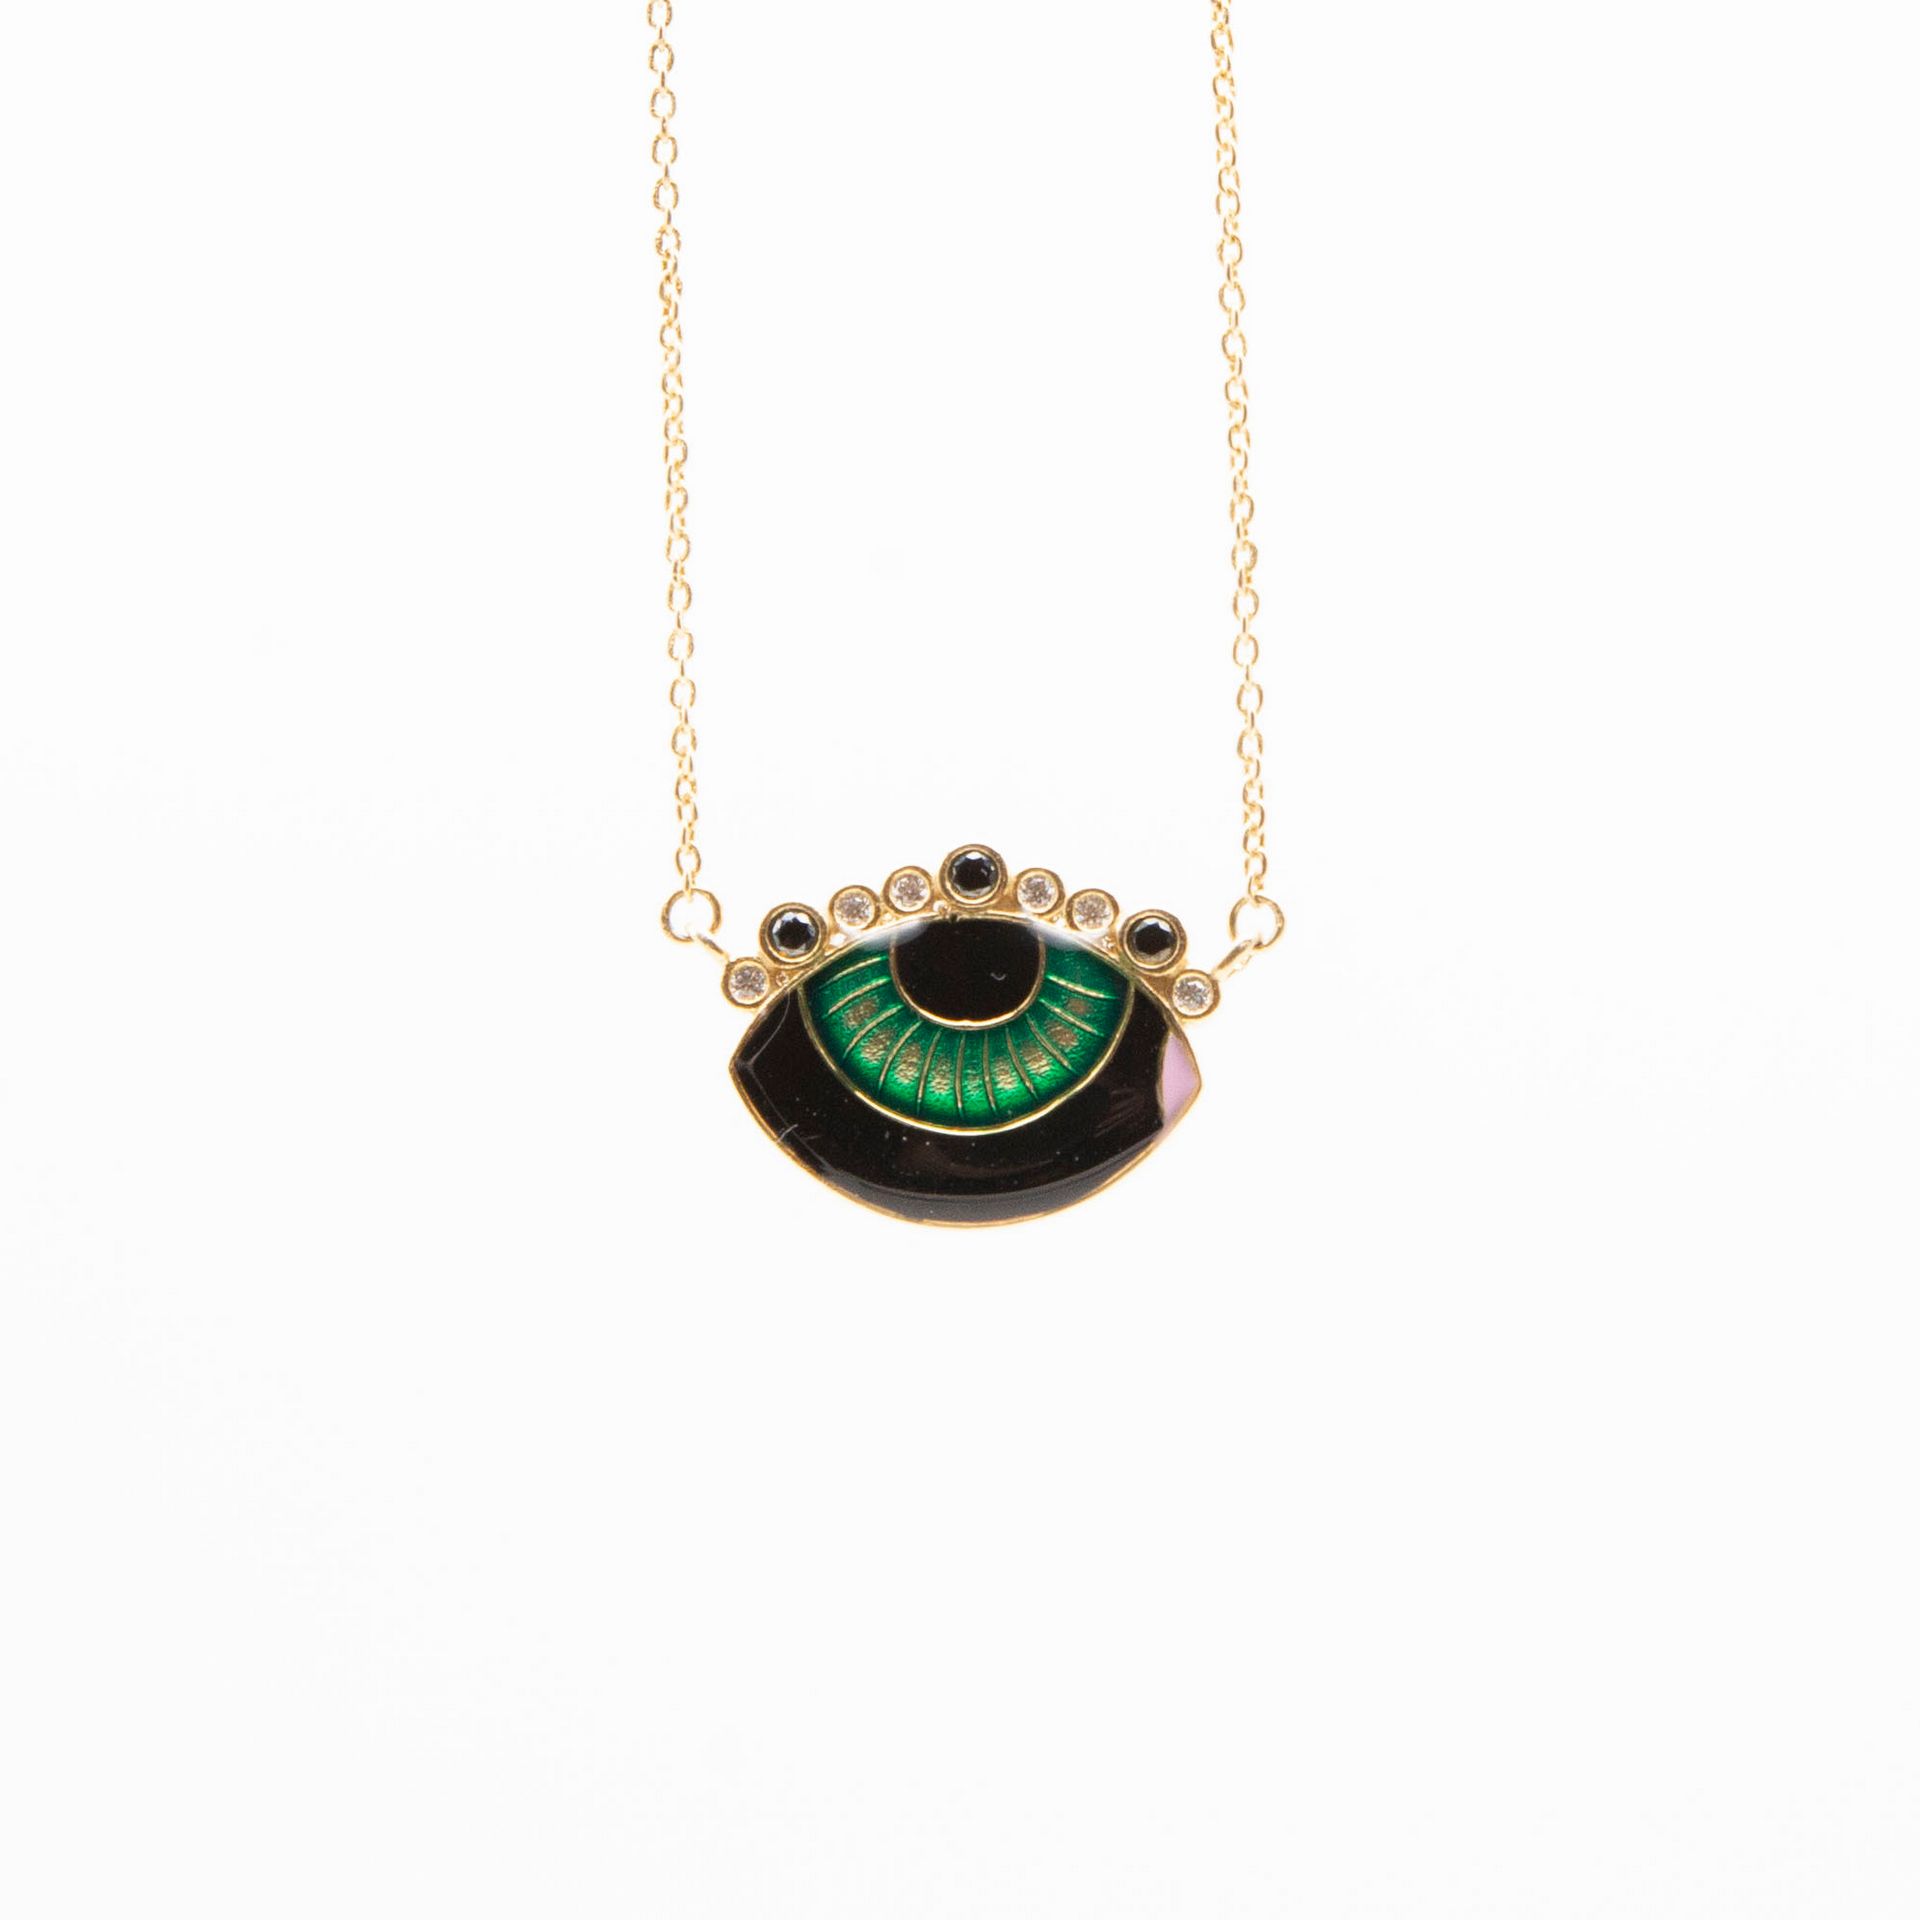 Evil Eye neclace silver 925 18cts gold plated enamel